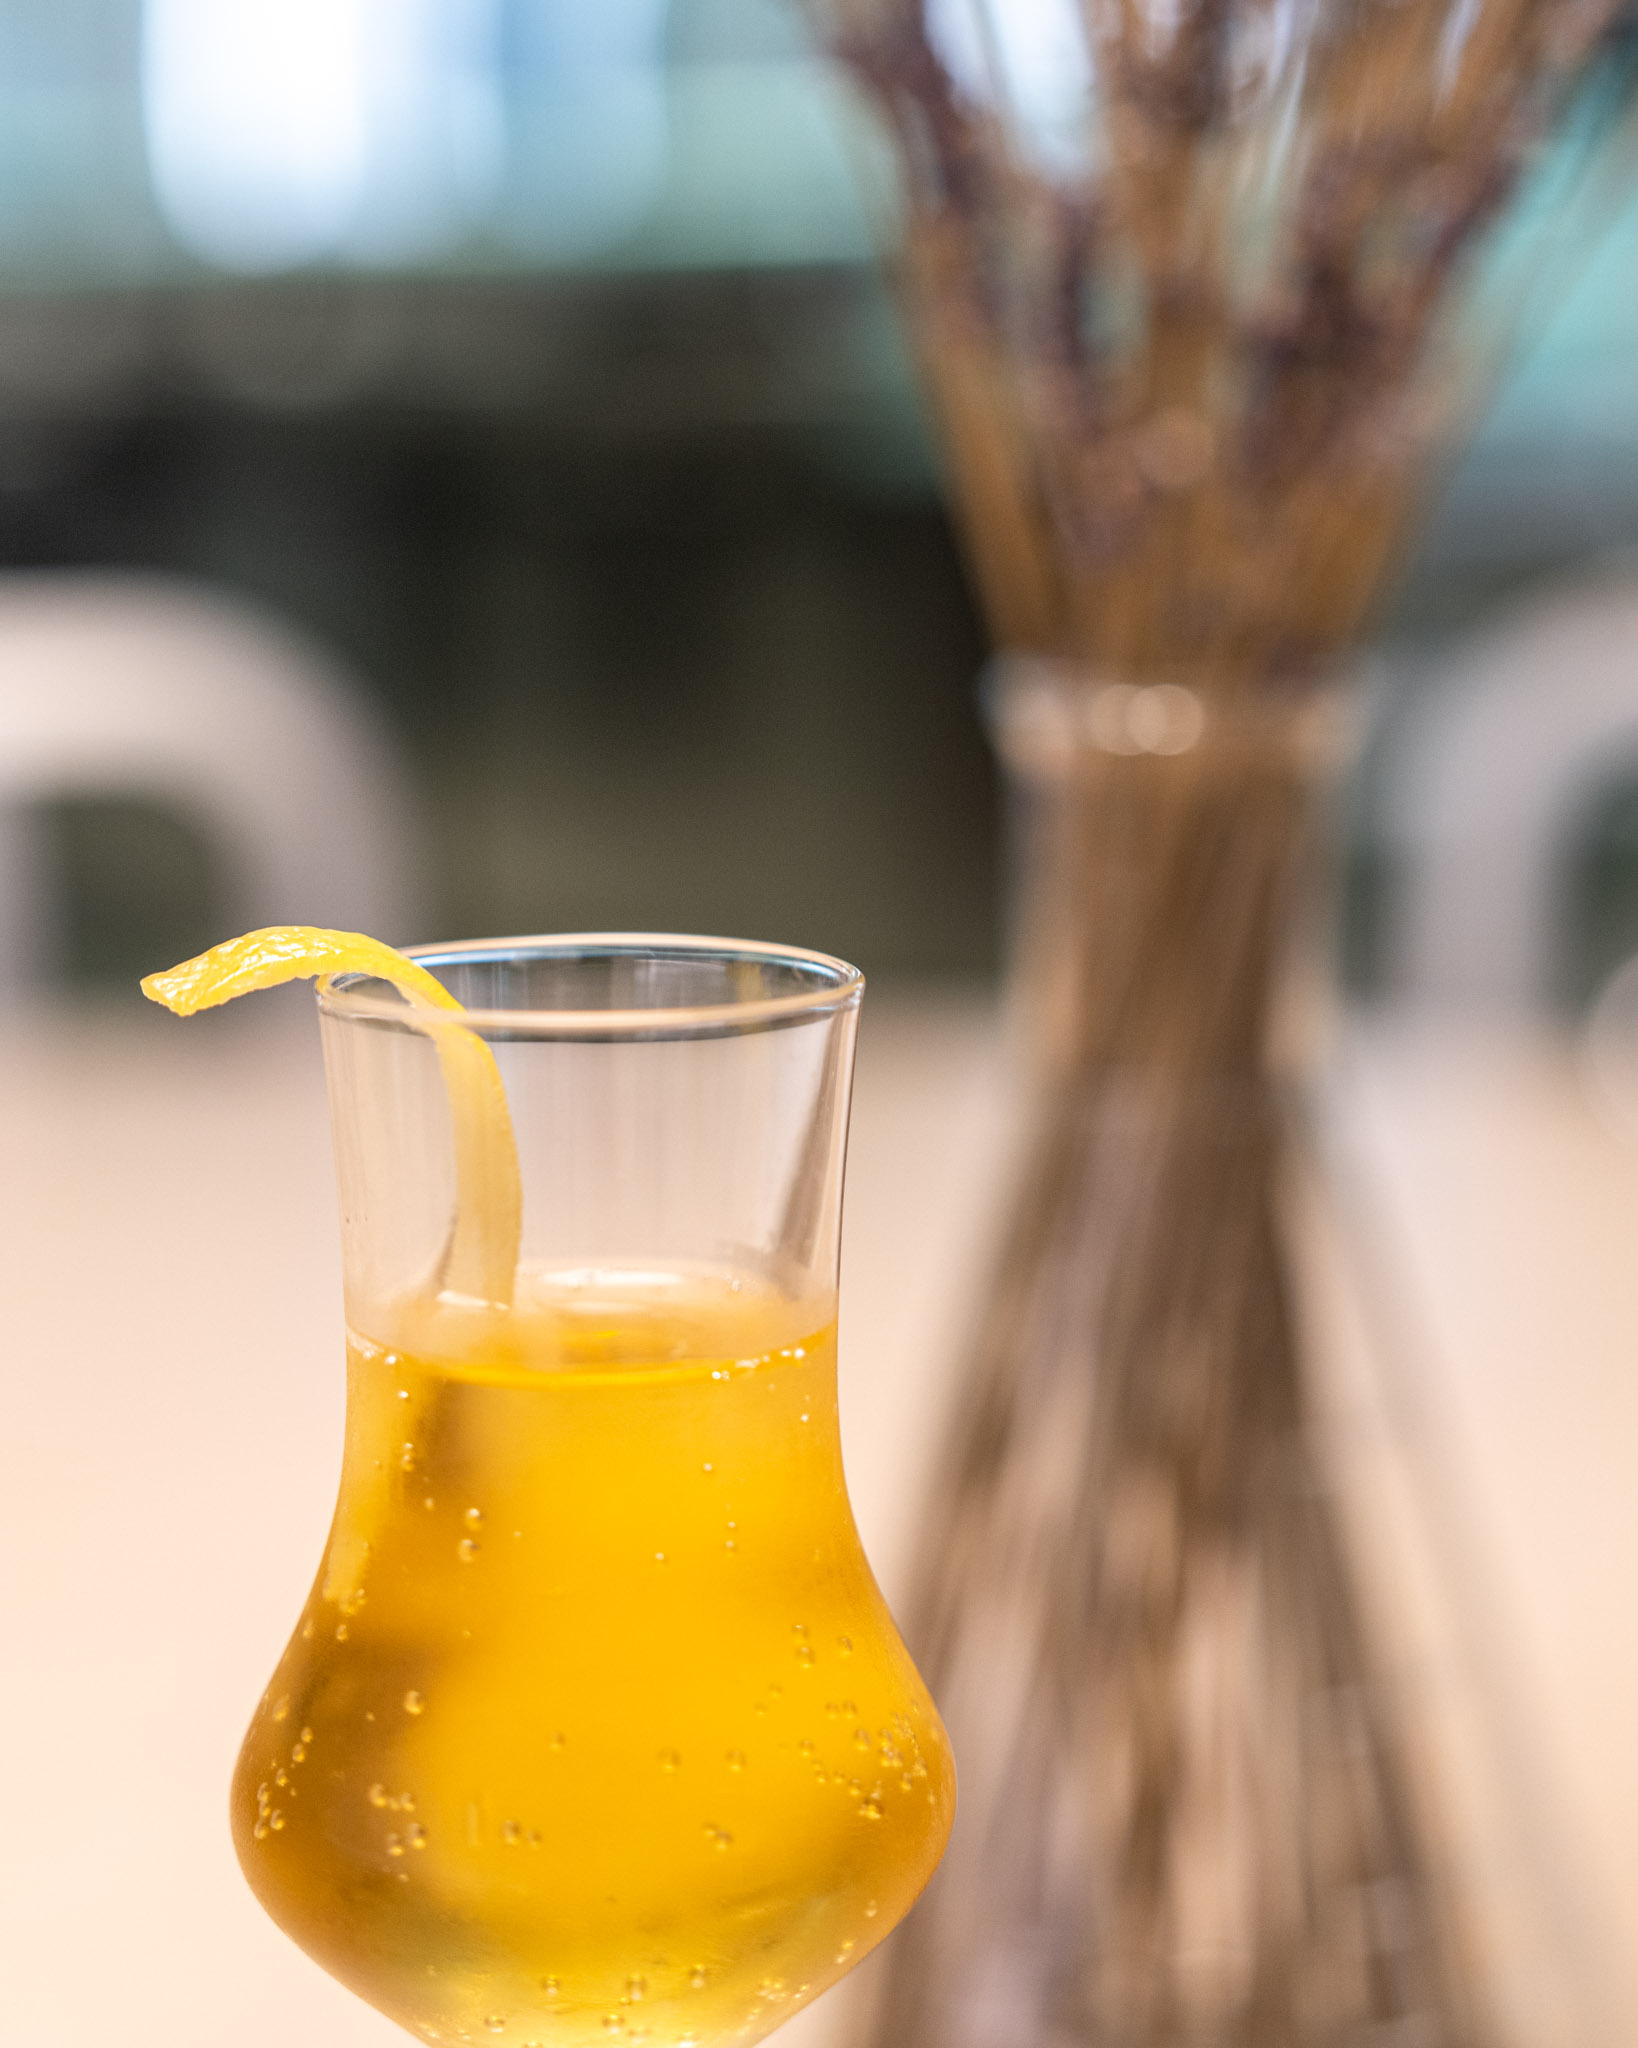 a glass of yellow liquid with a lemon peel in the middle